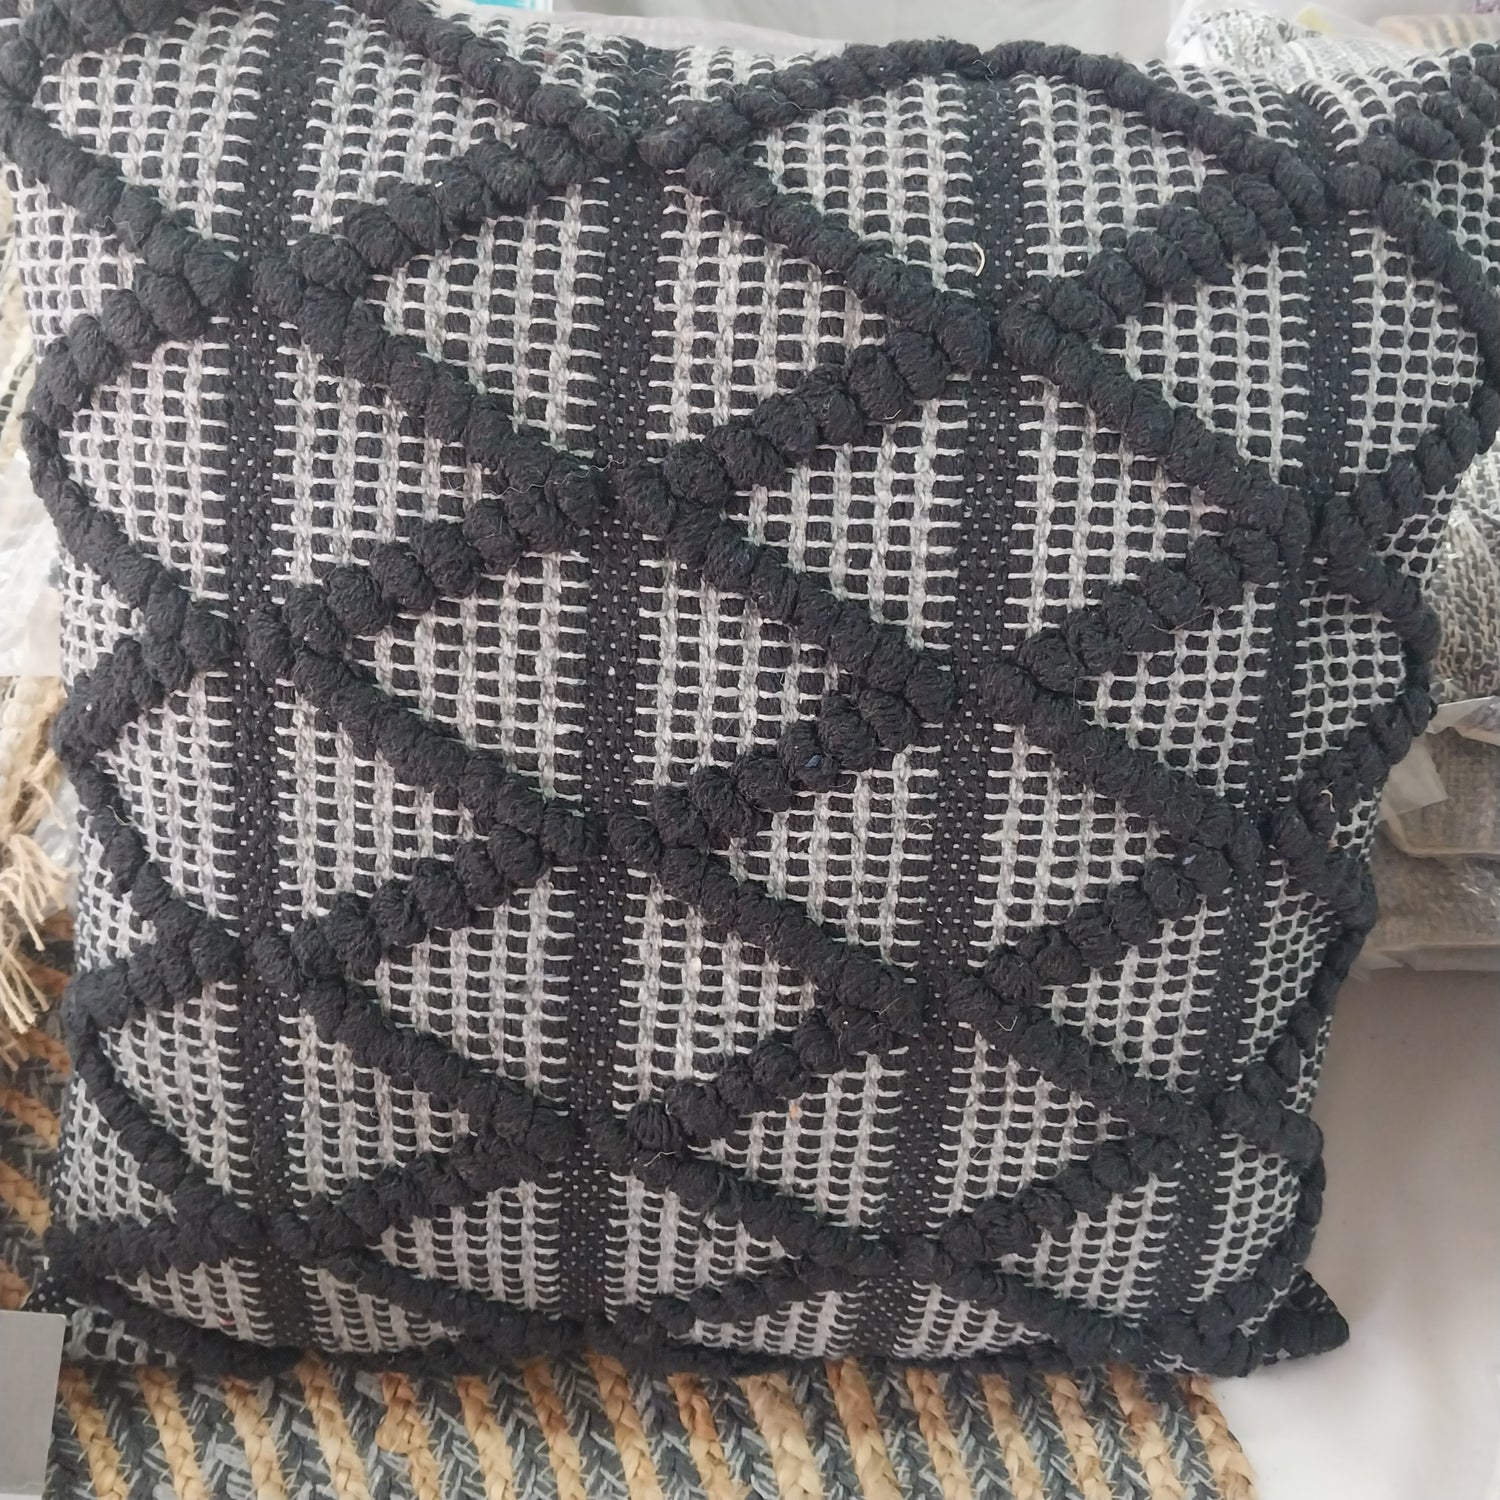 Cushions (2 pieces) - 45cm x 45cm - Vacuum Sealed and Filled